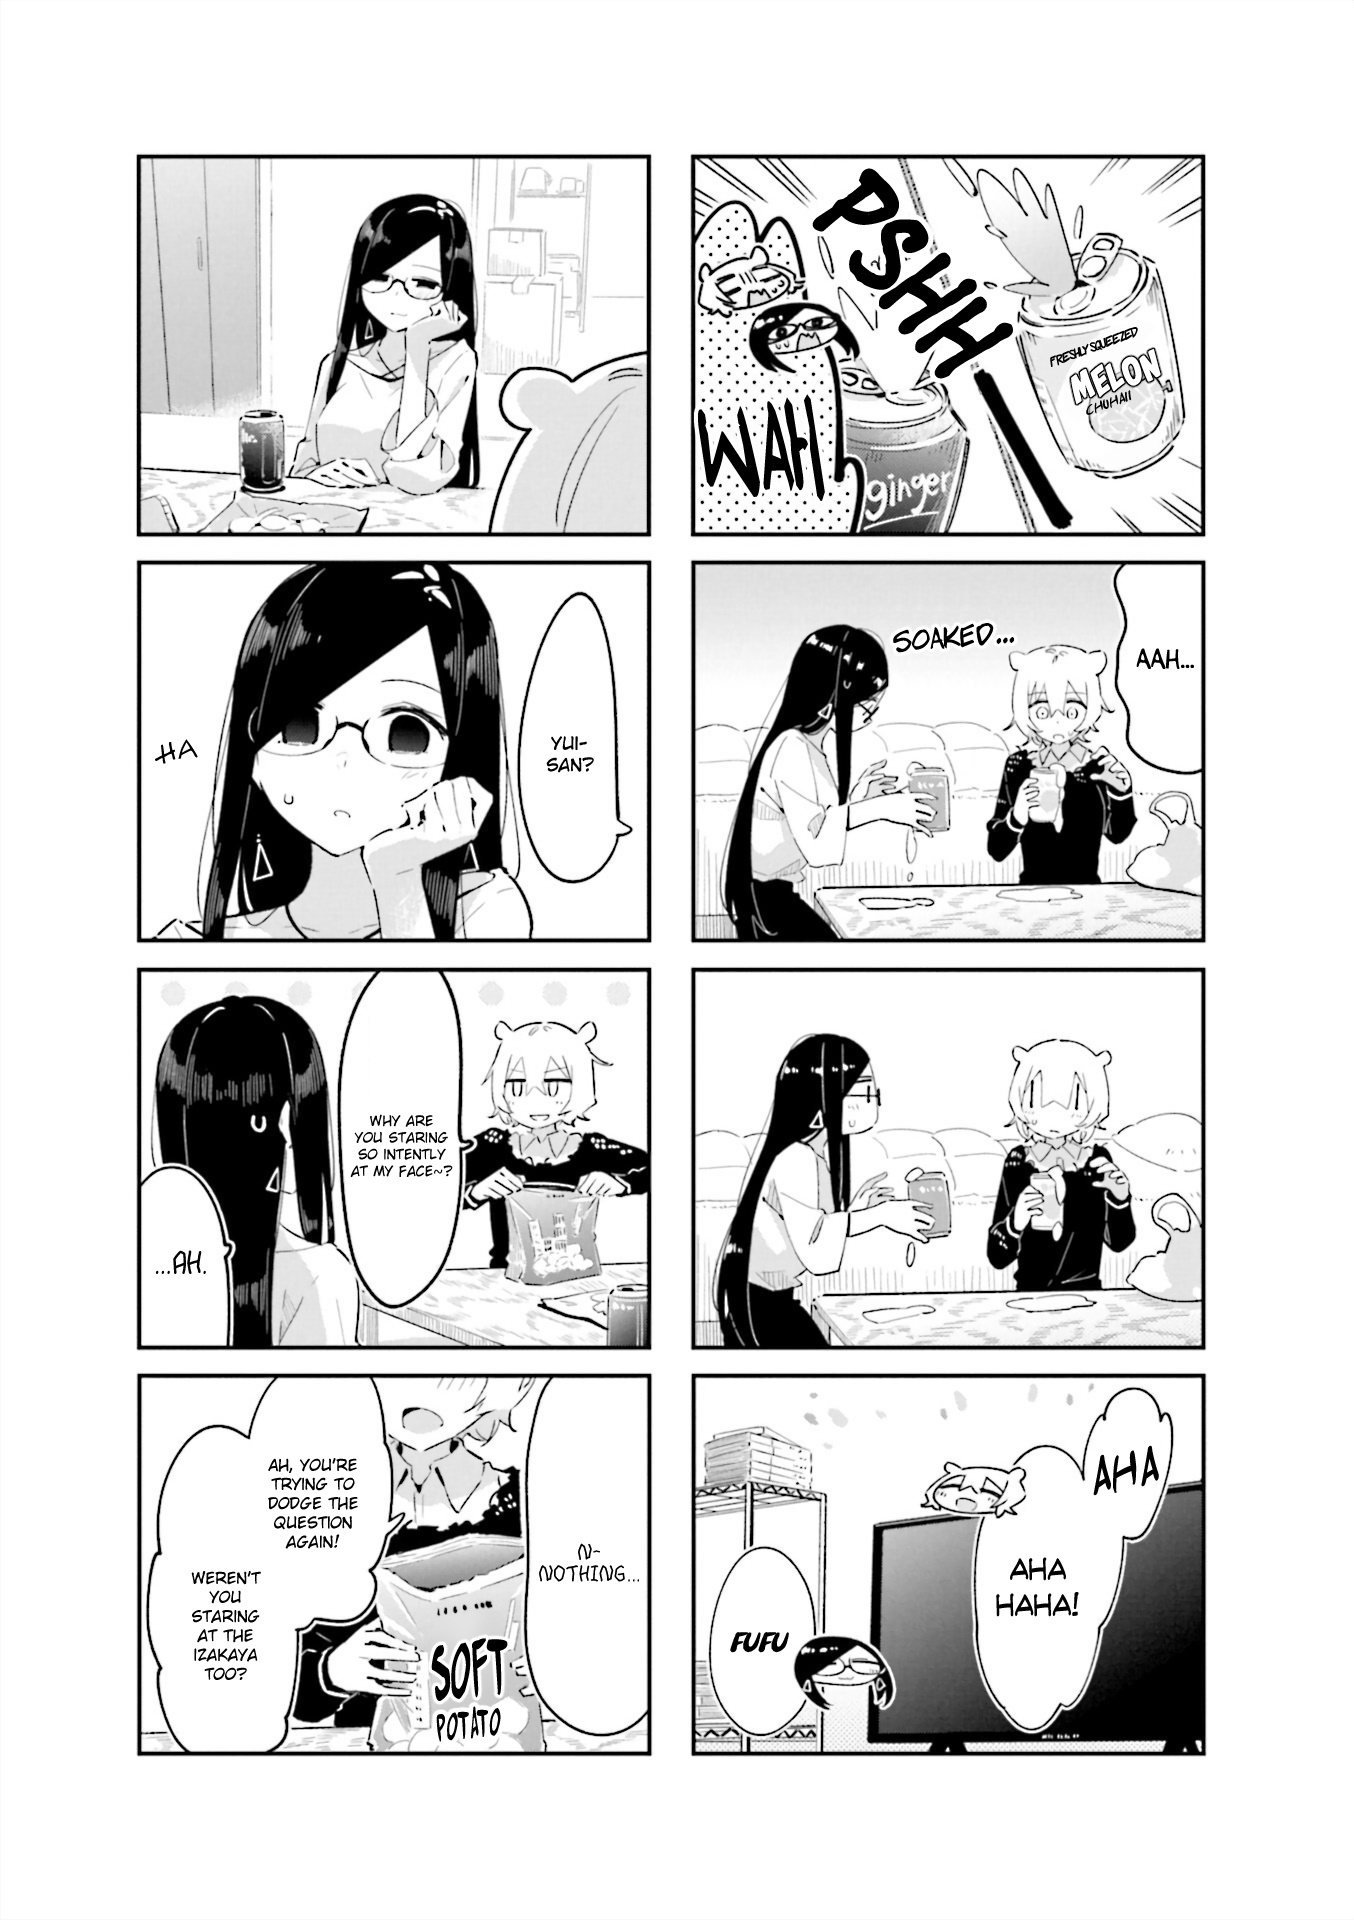 Hogushite, Yui-San Vol.1 Chapter 13: Home Date - Picture 3